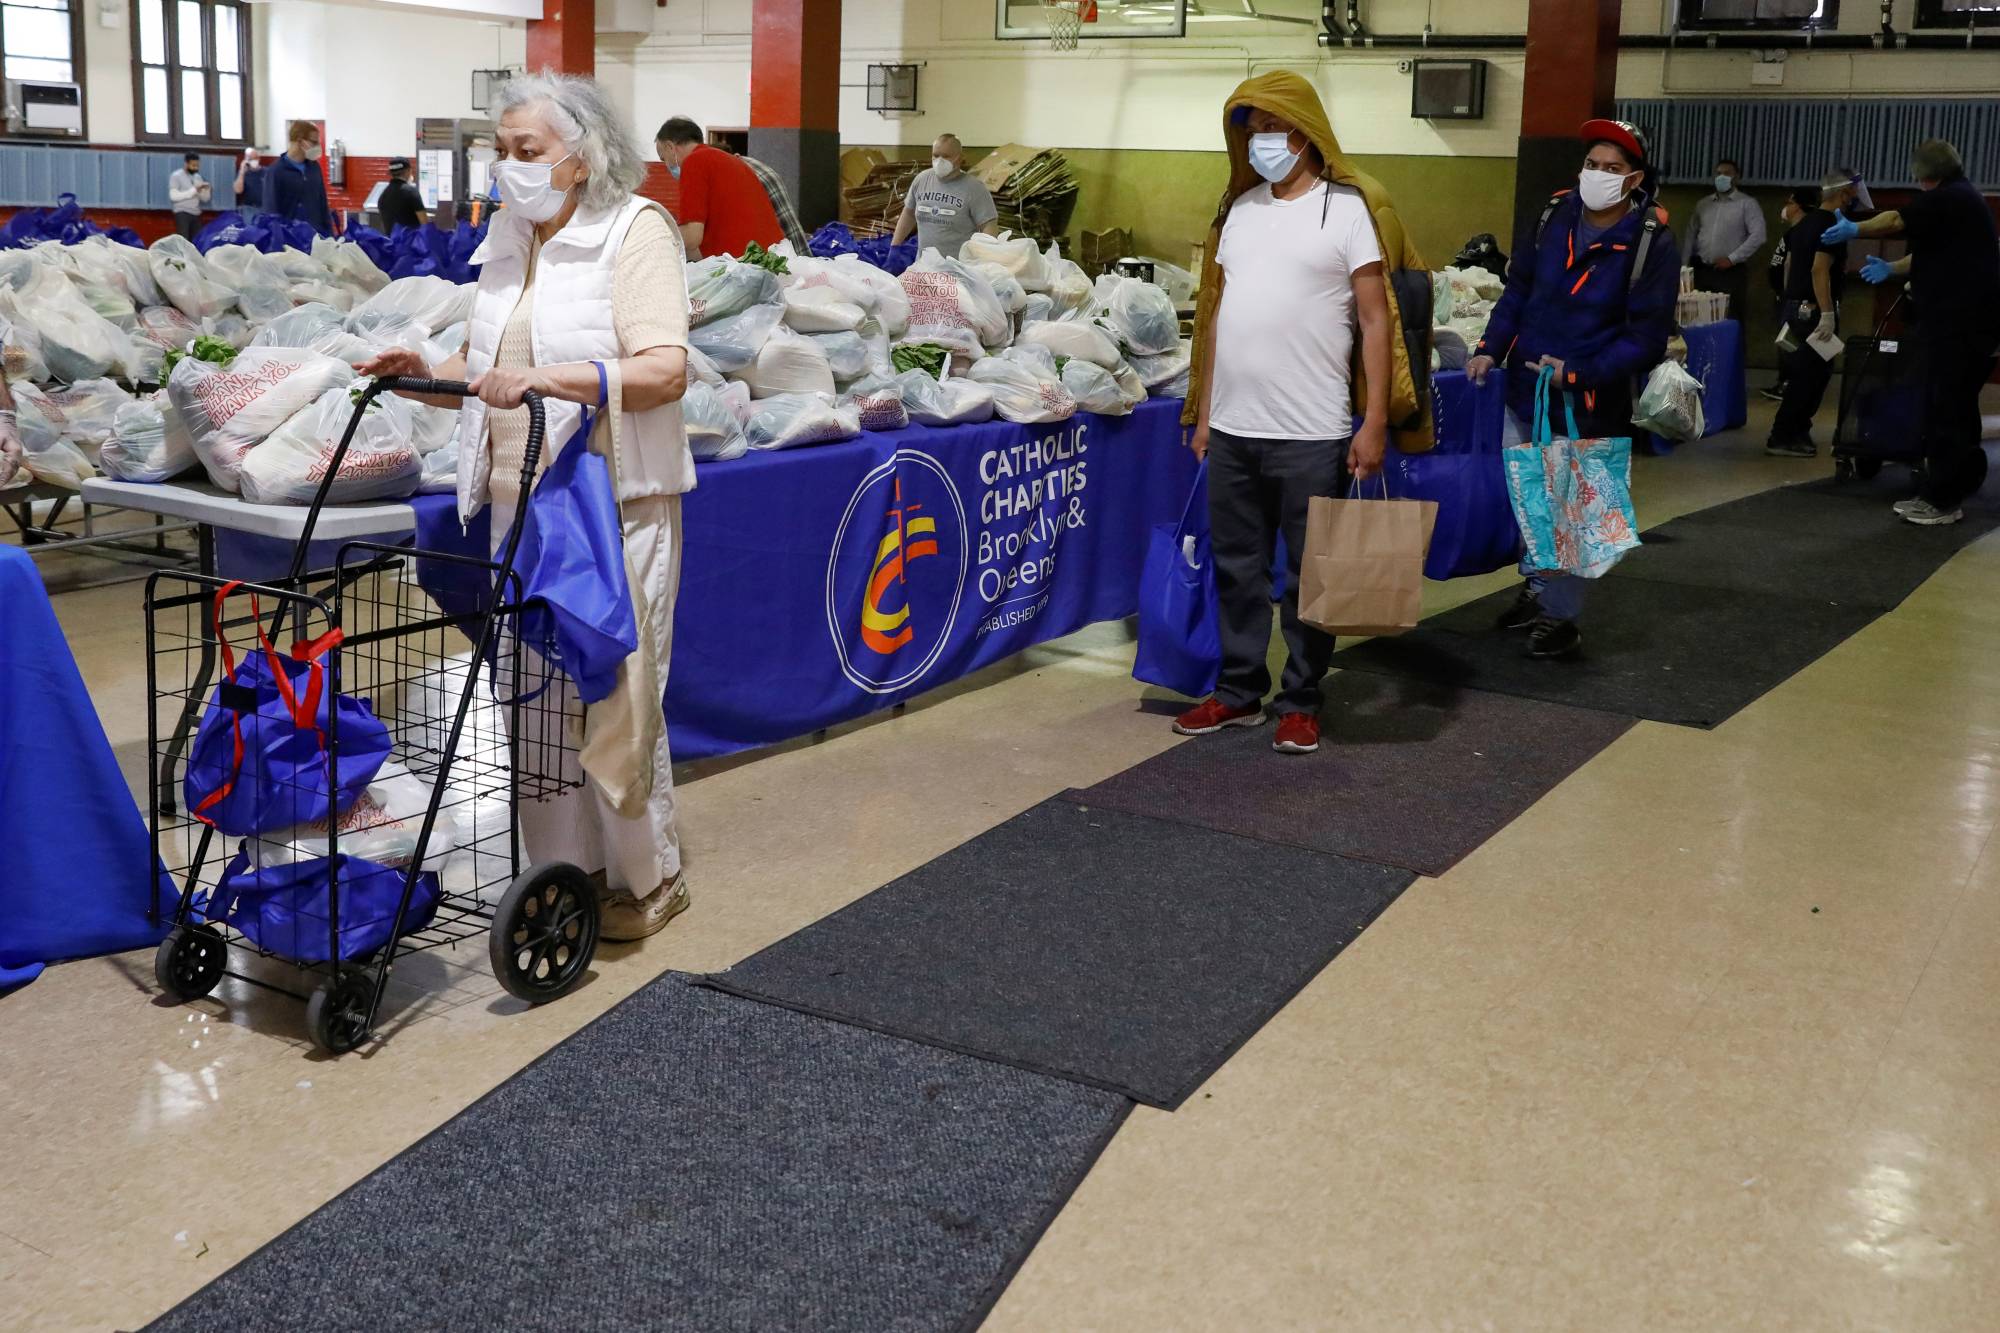 People visit the food bank at St. Bartholomew Church in the Elmhurst section of Queens, New York, in May 2020.  | REUTERS